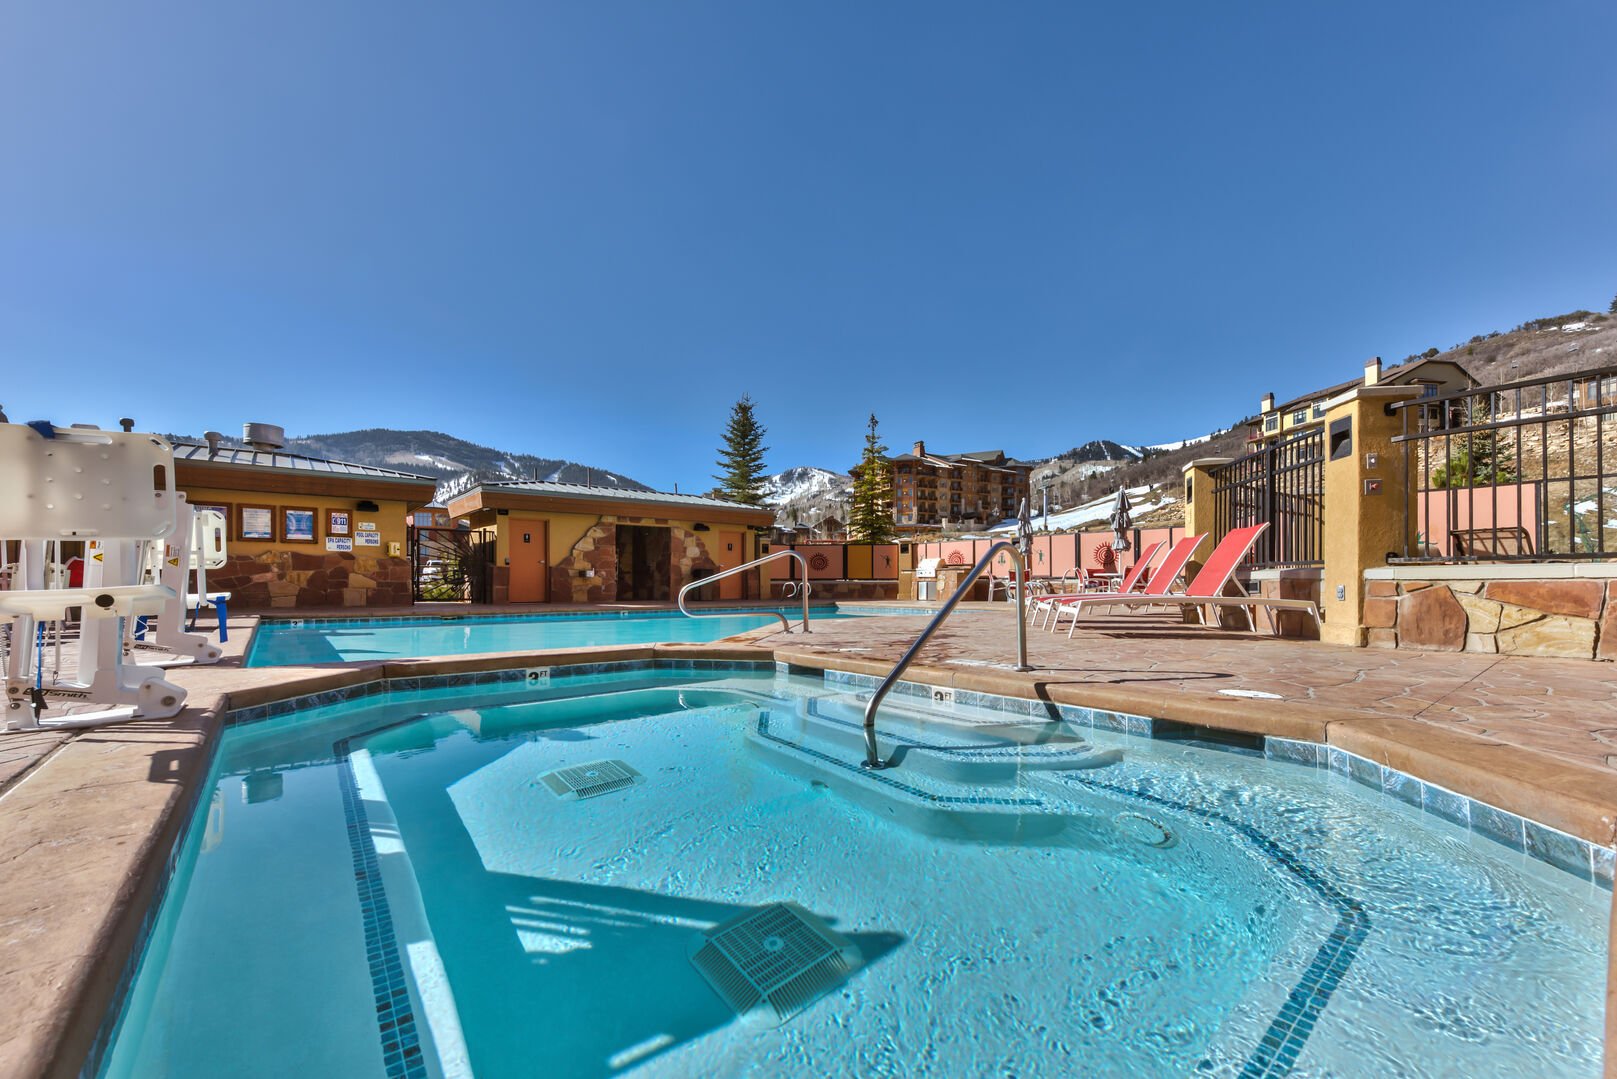 At a property featuring all the amenities you are looking for including year round heated pool